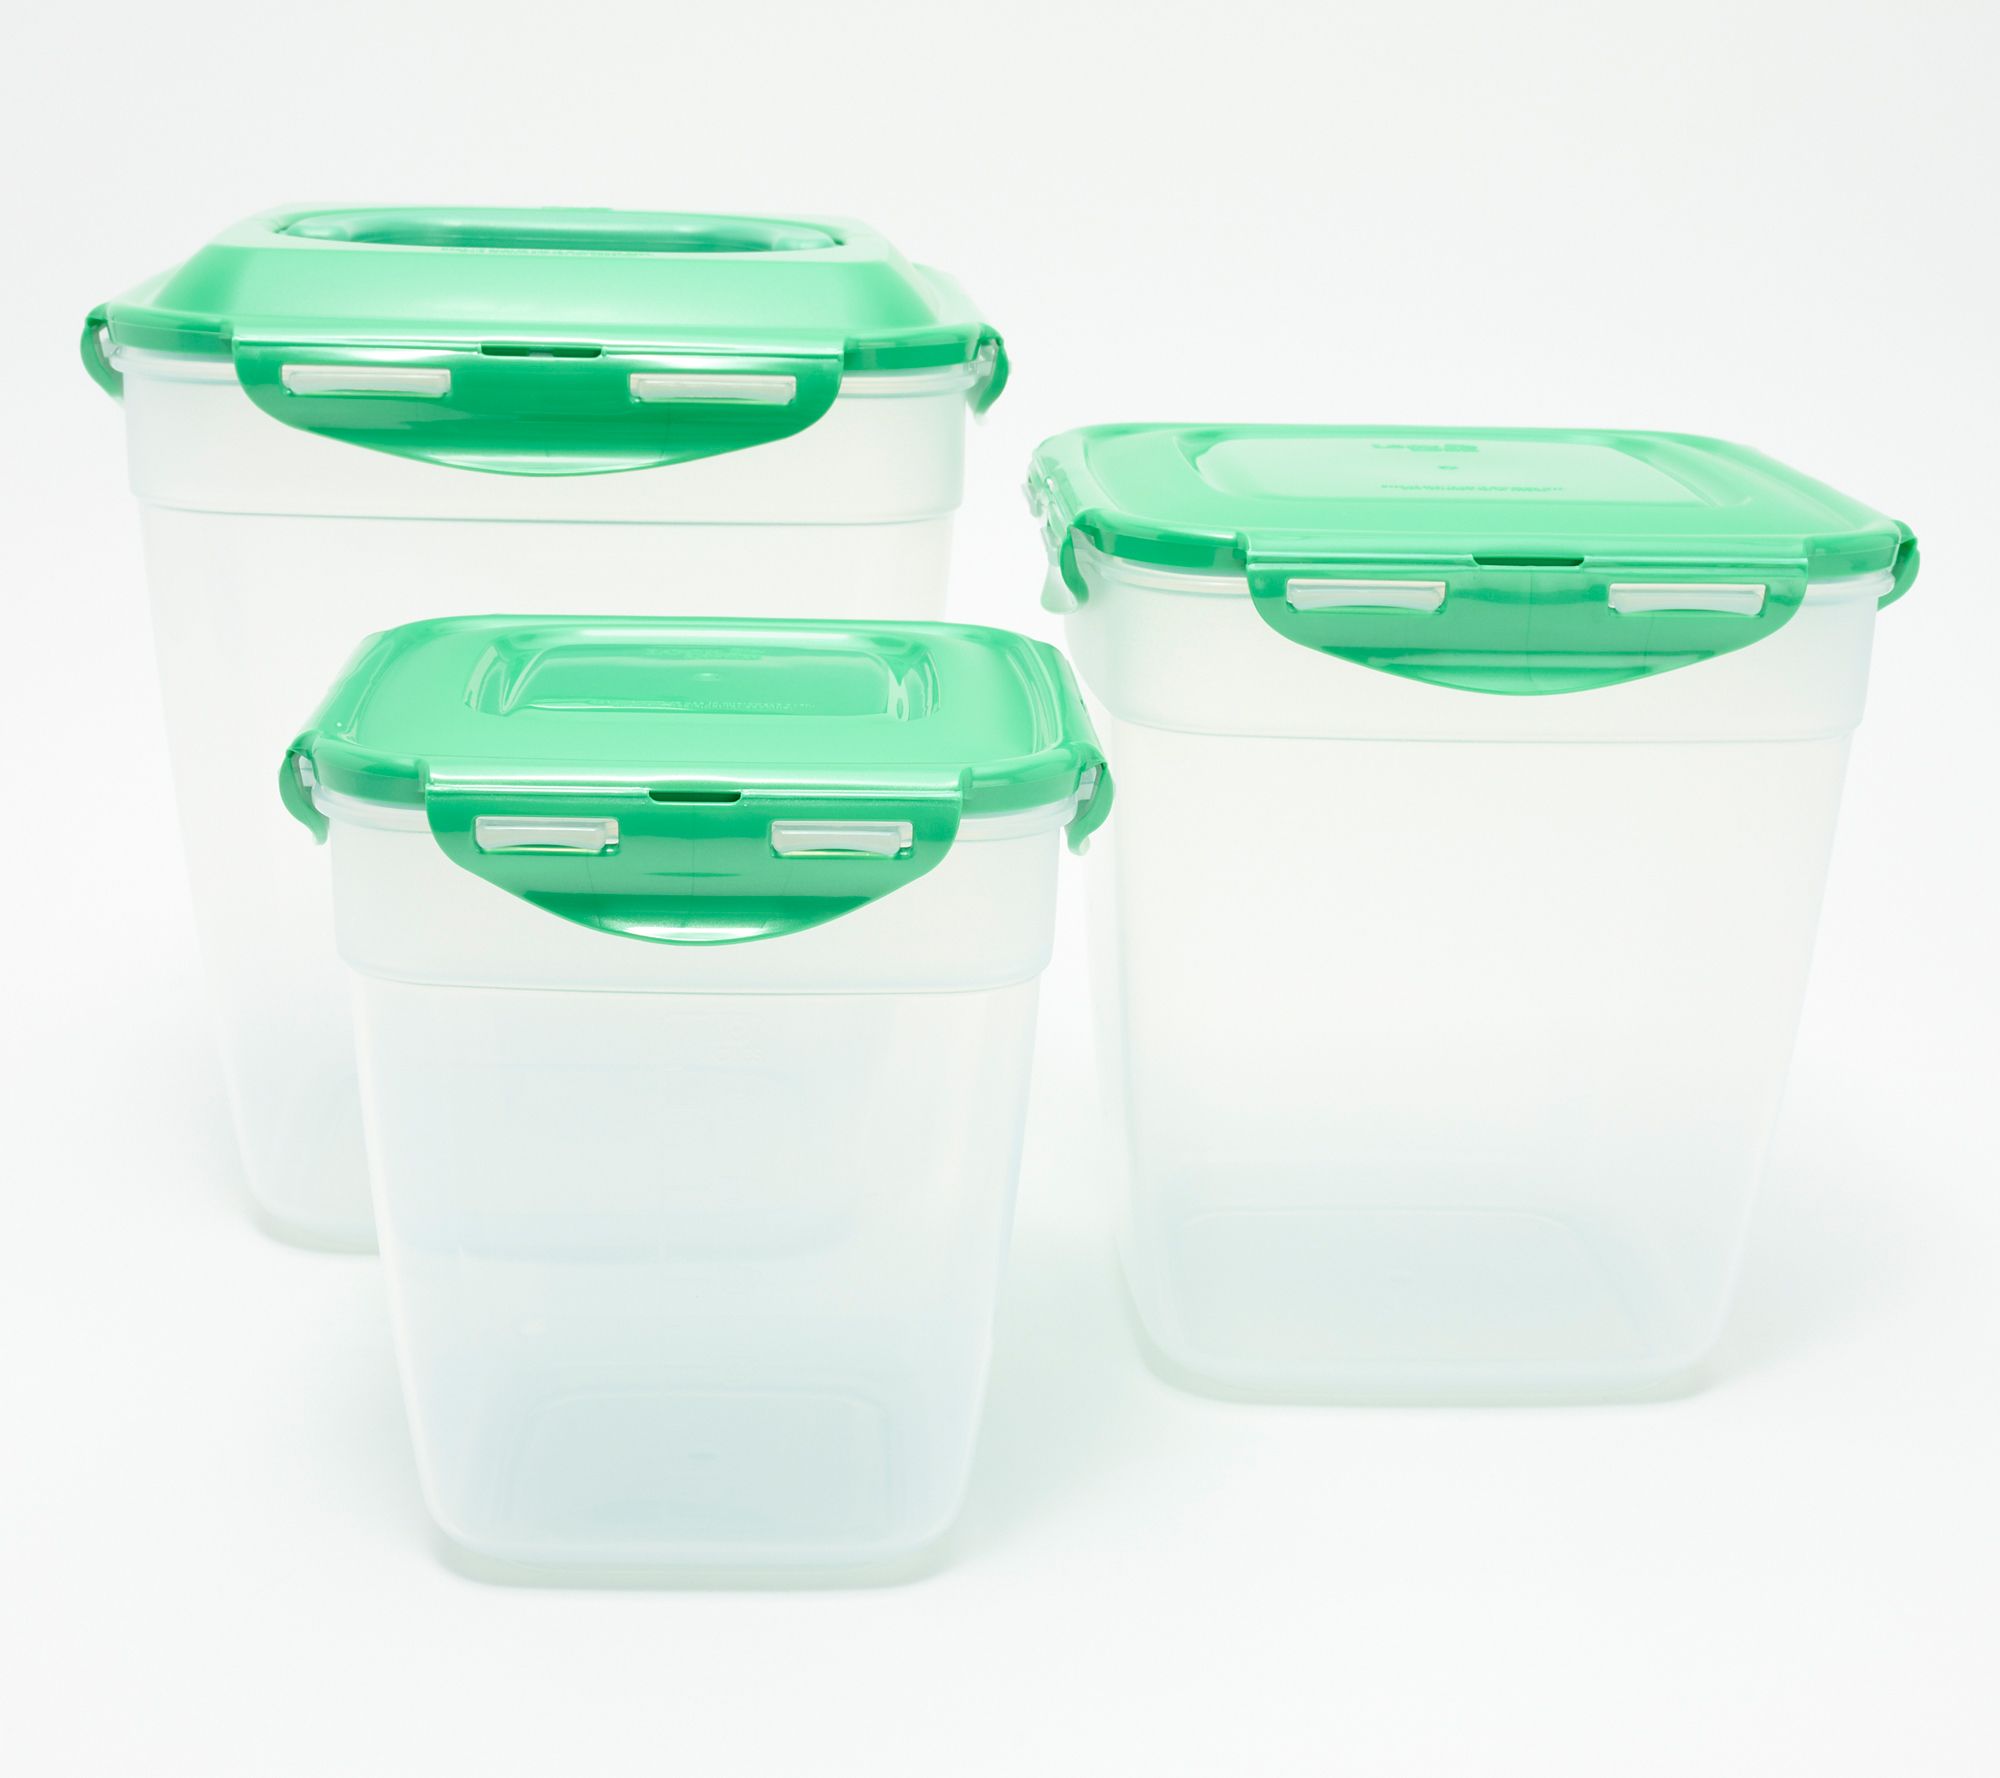 Lot of 18 Mini Plastic Reusable Ramakins & Snack Containers with Lids, New